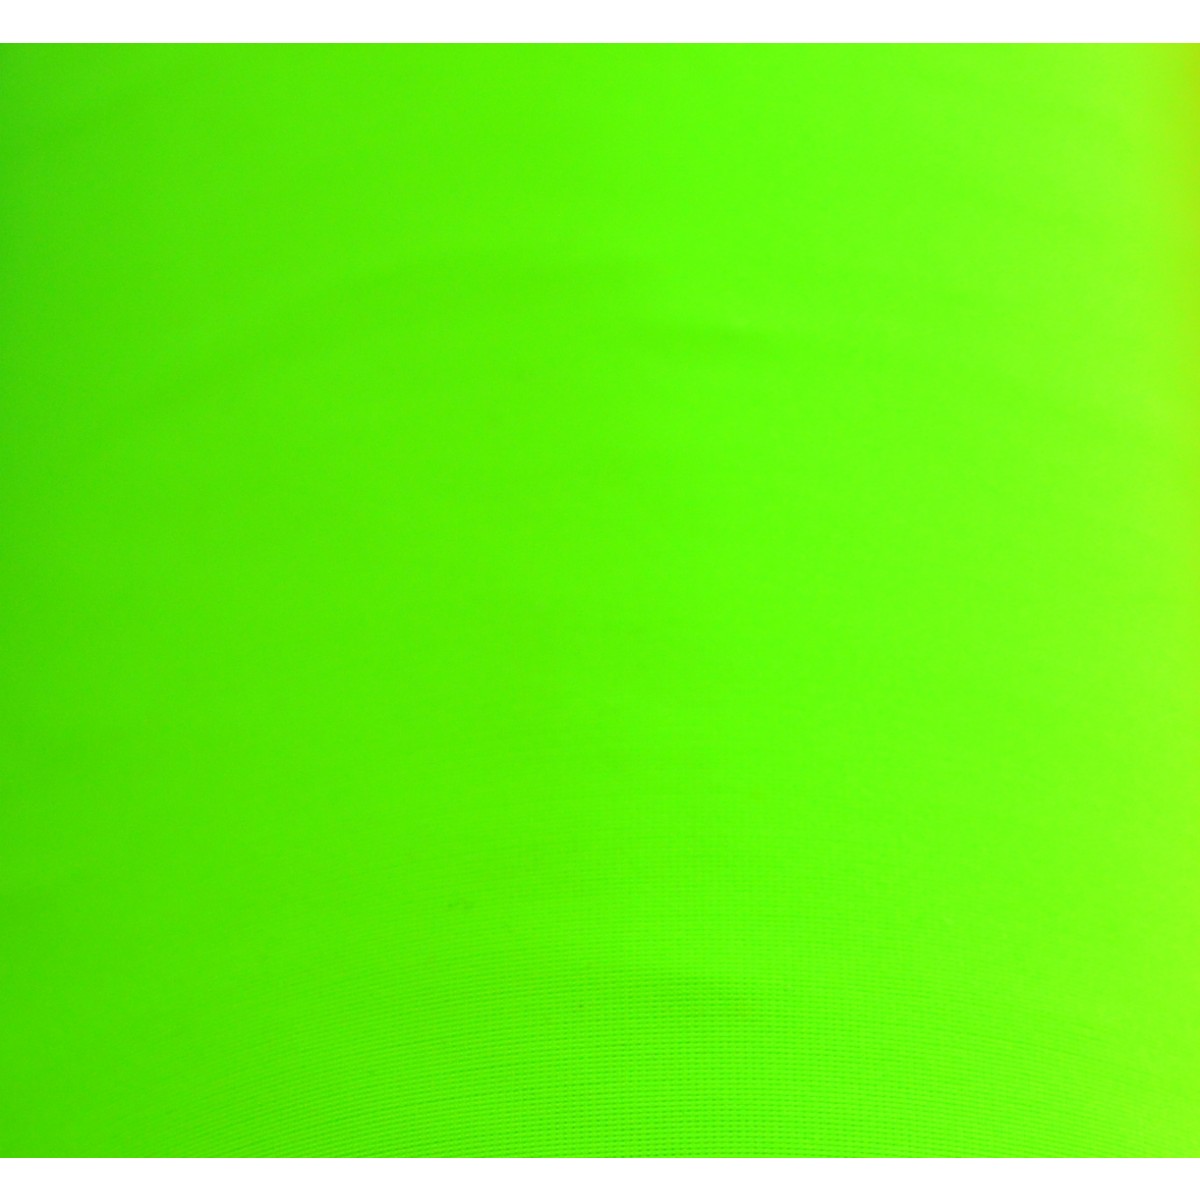 Solid Neon Green Backgrounds Solid neon background